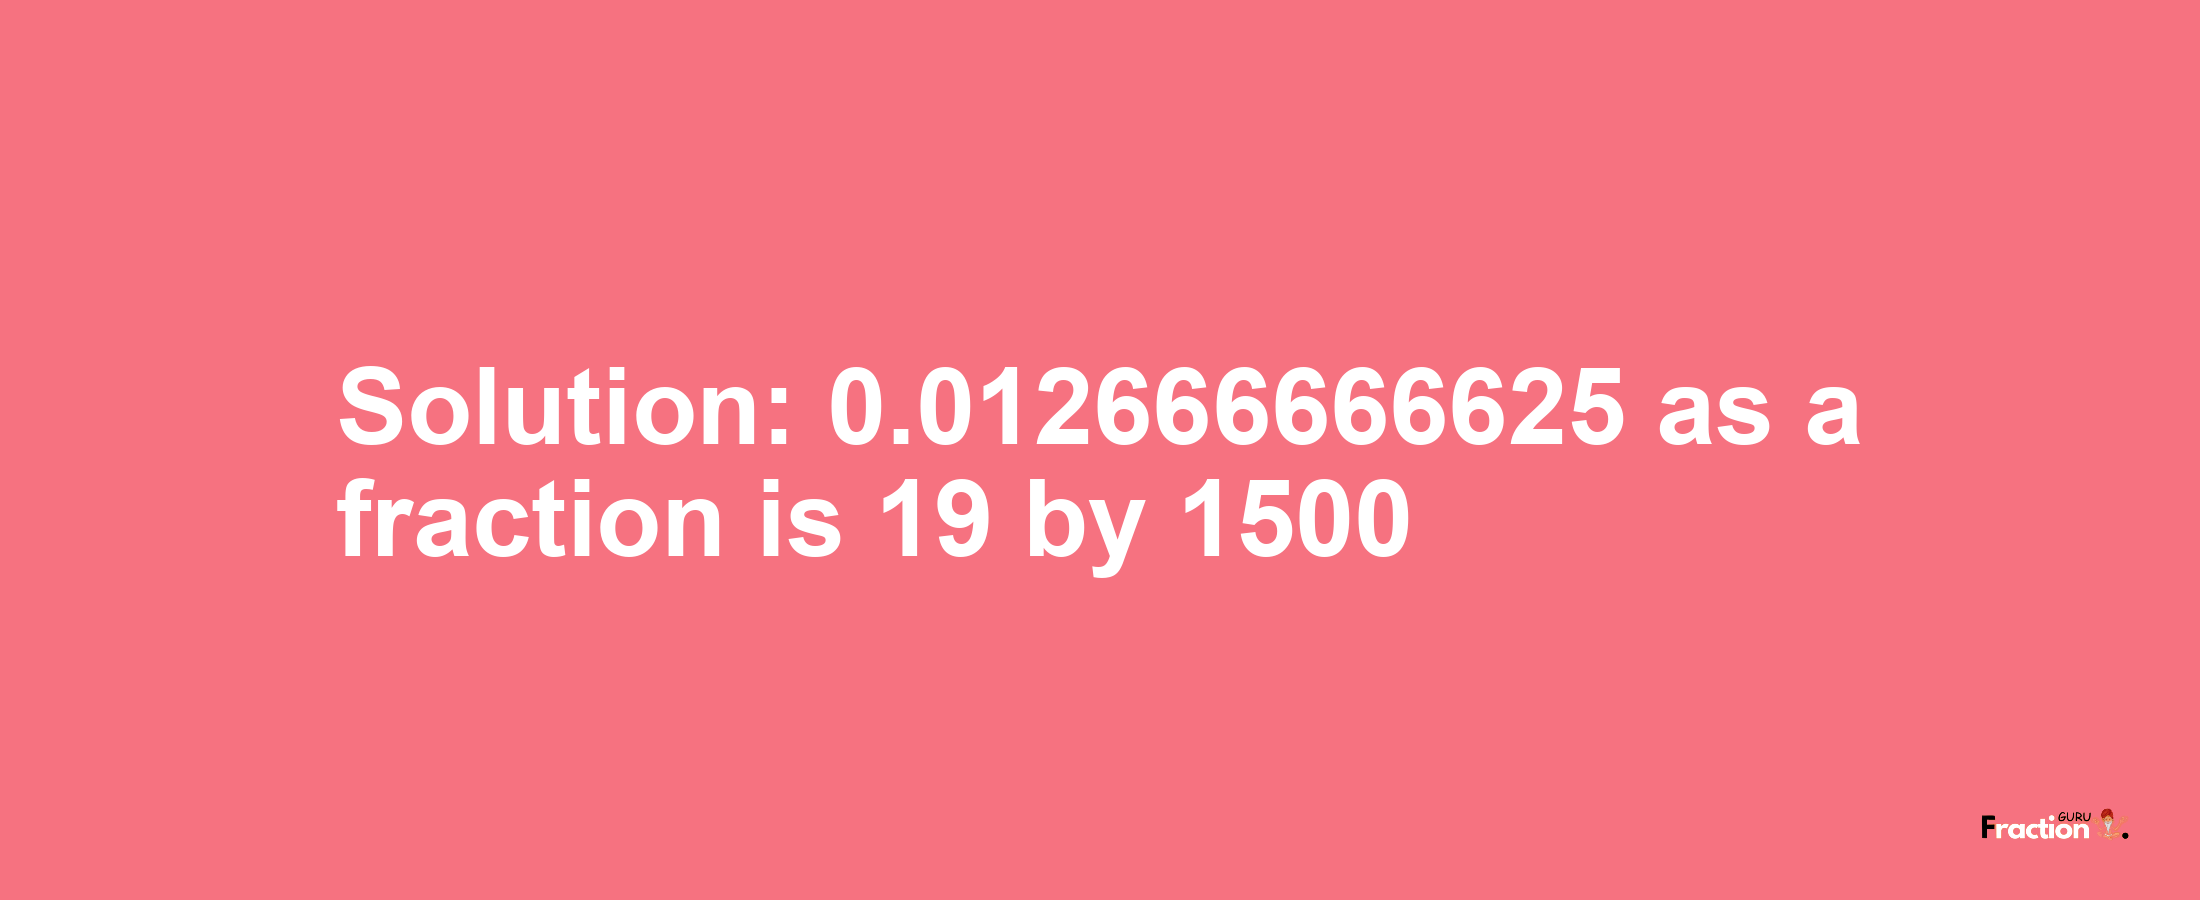 Solution:0.012666666625 as a fraction is 19/1500